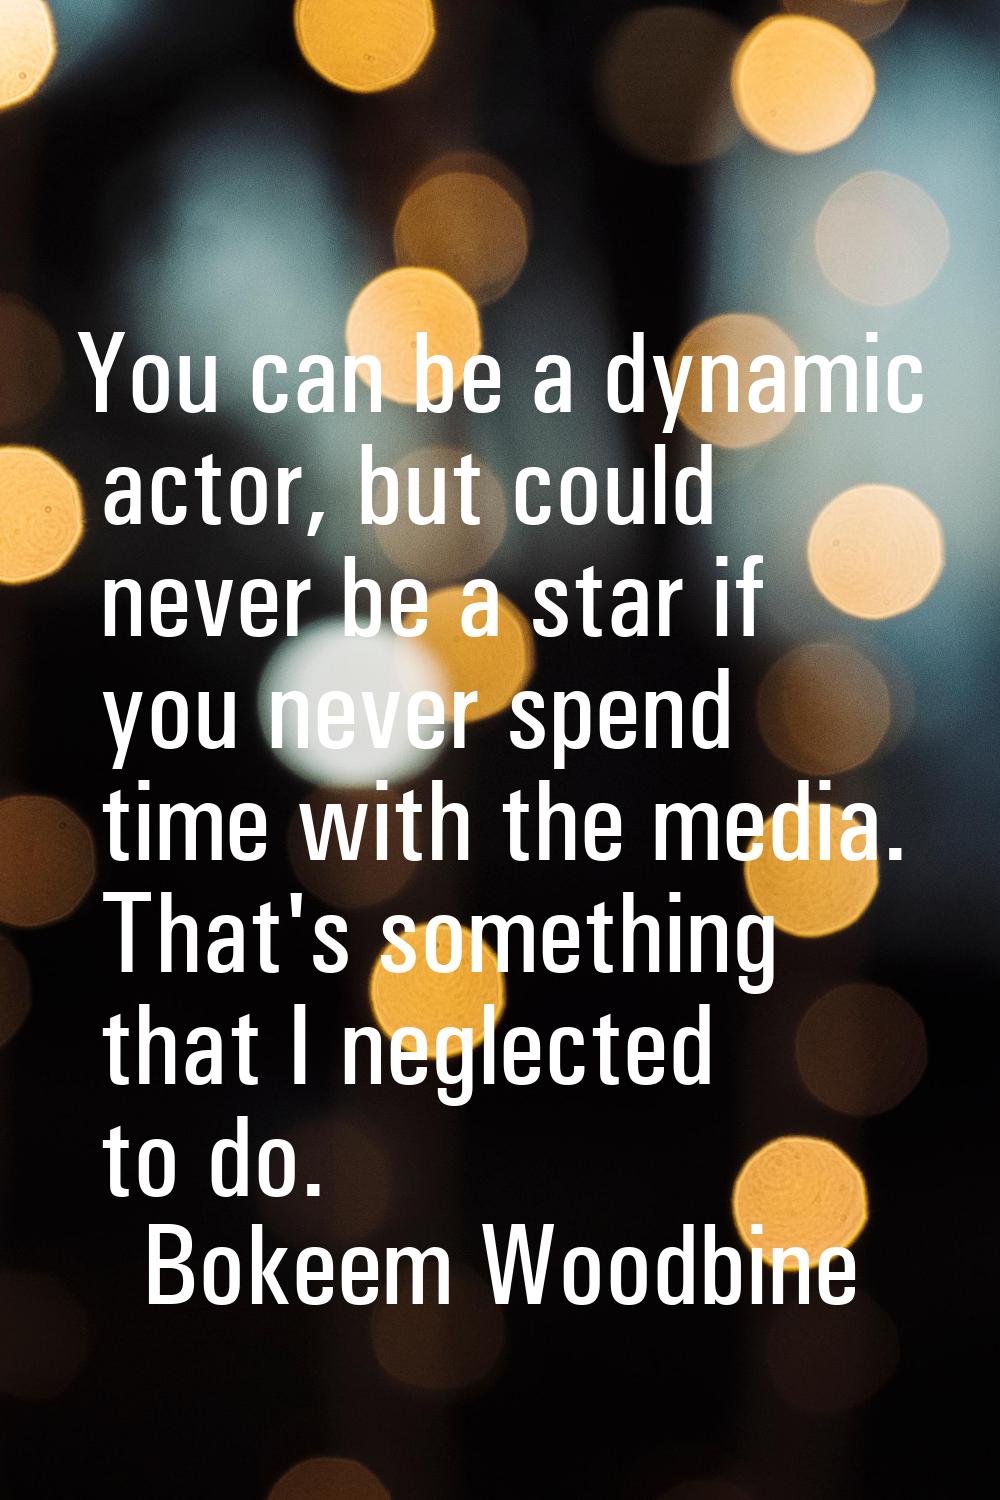 You can be a dynamic actor, but could never be a star if you never spend time with the media. That'